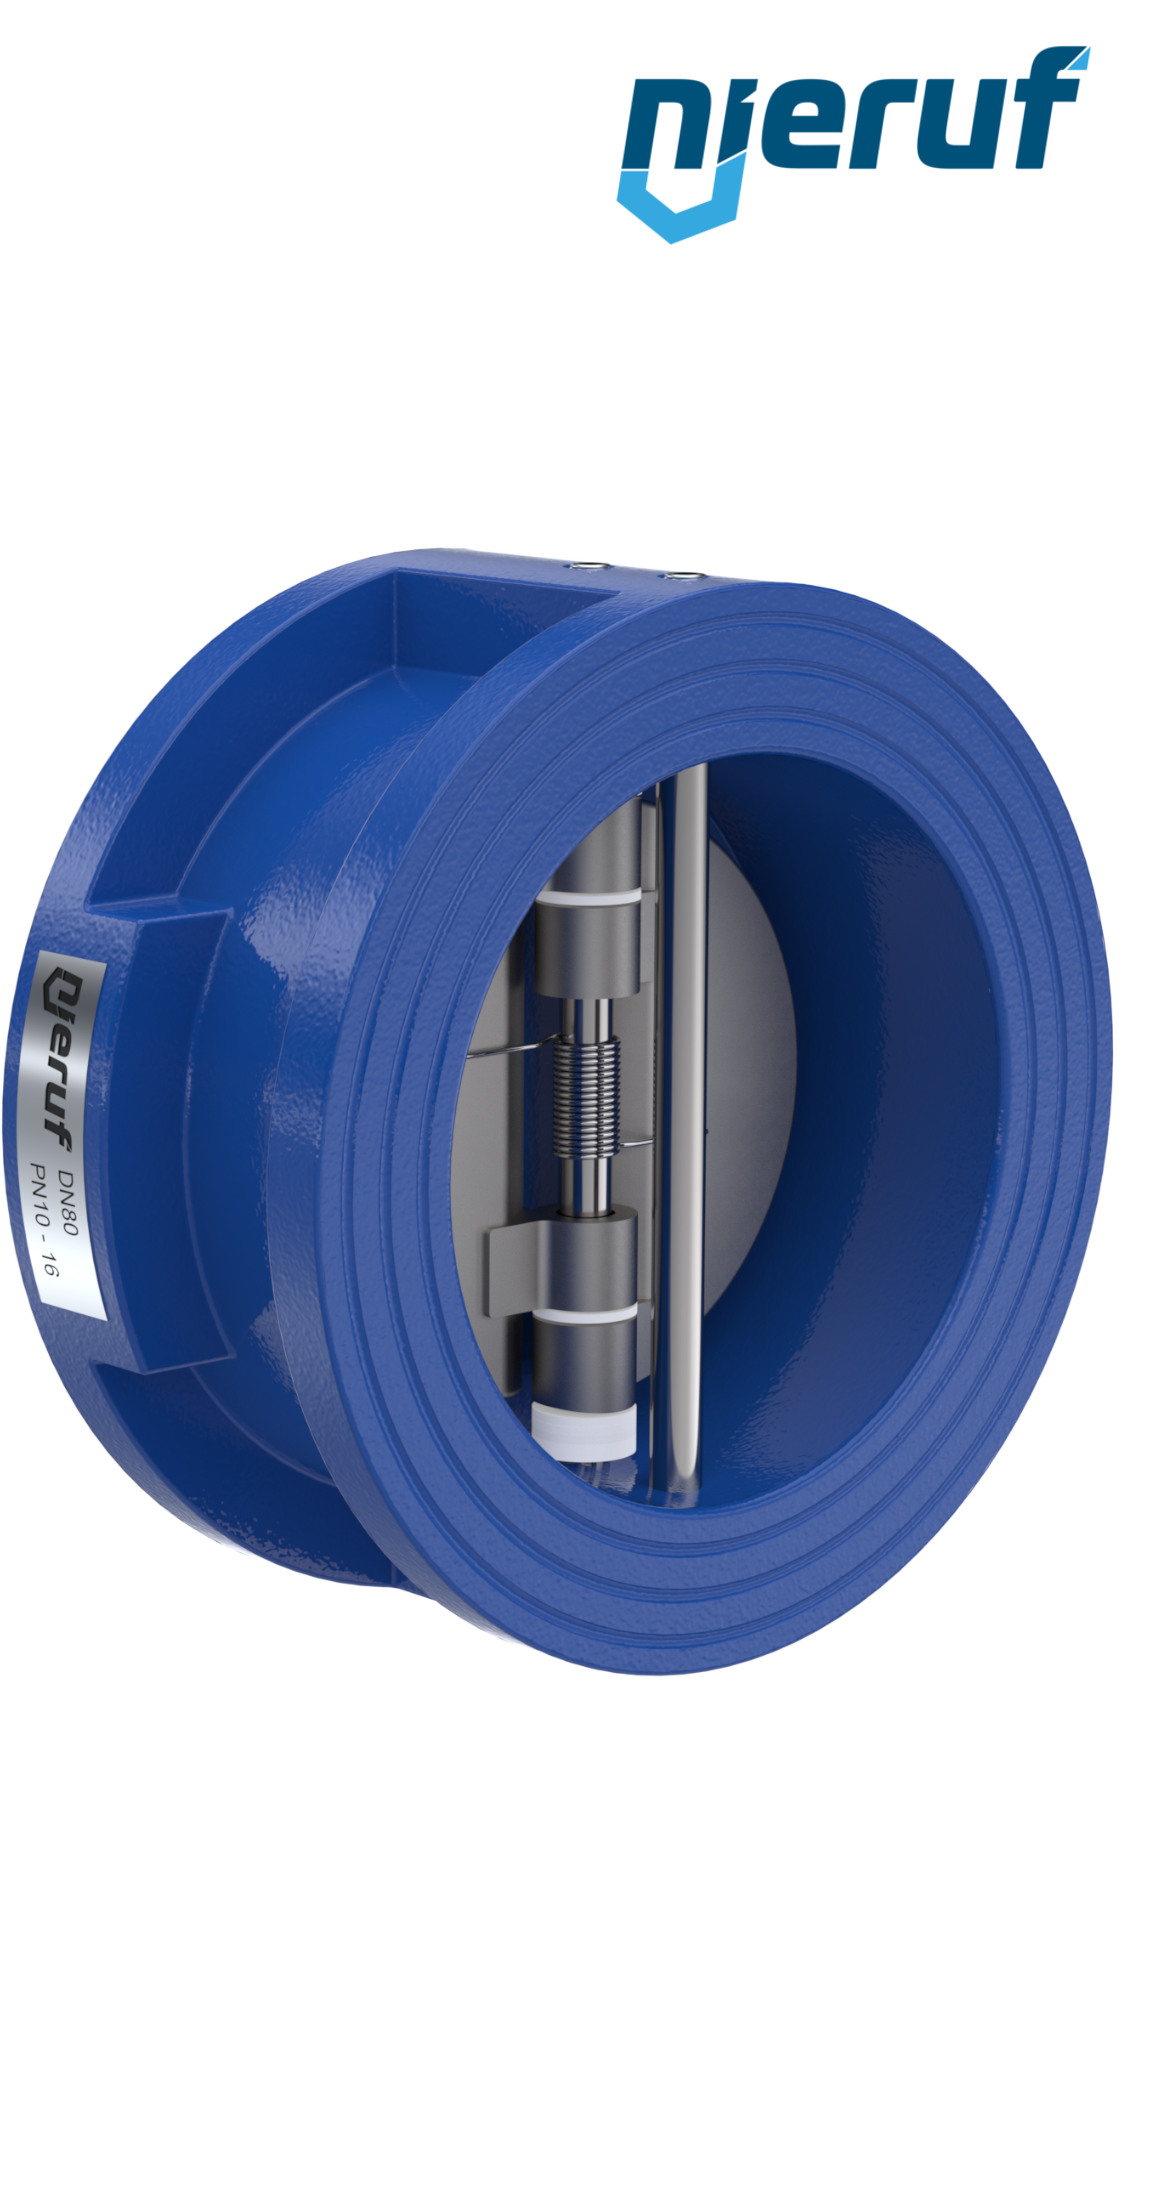 dual plate check valve DN80 DR01 GGG40 epoxyd plated blue 180µm EPDM